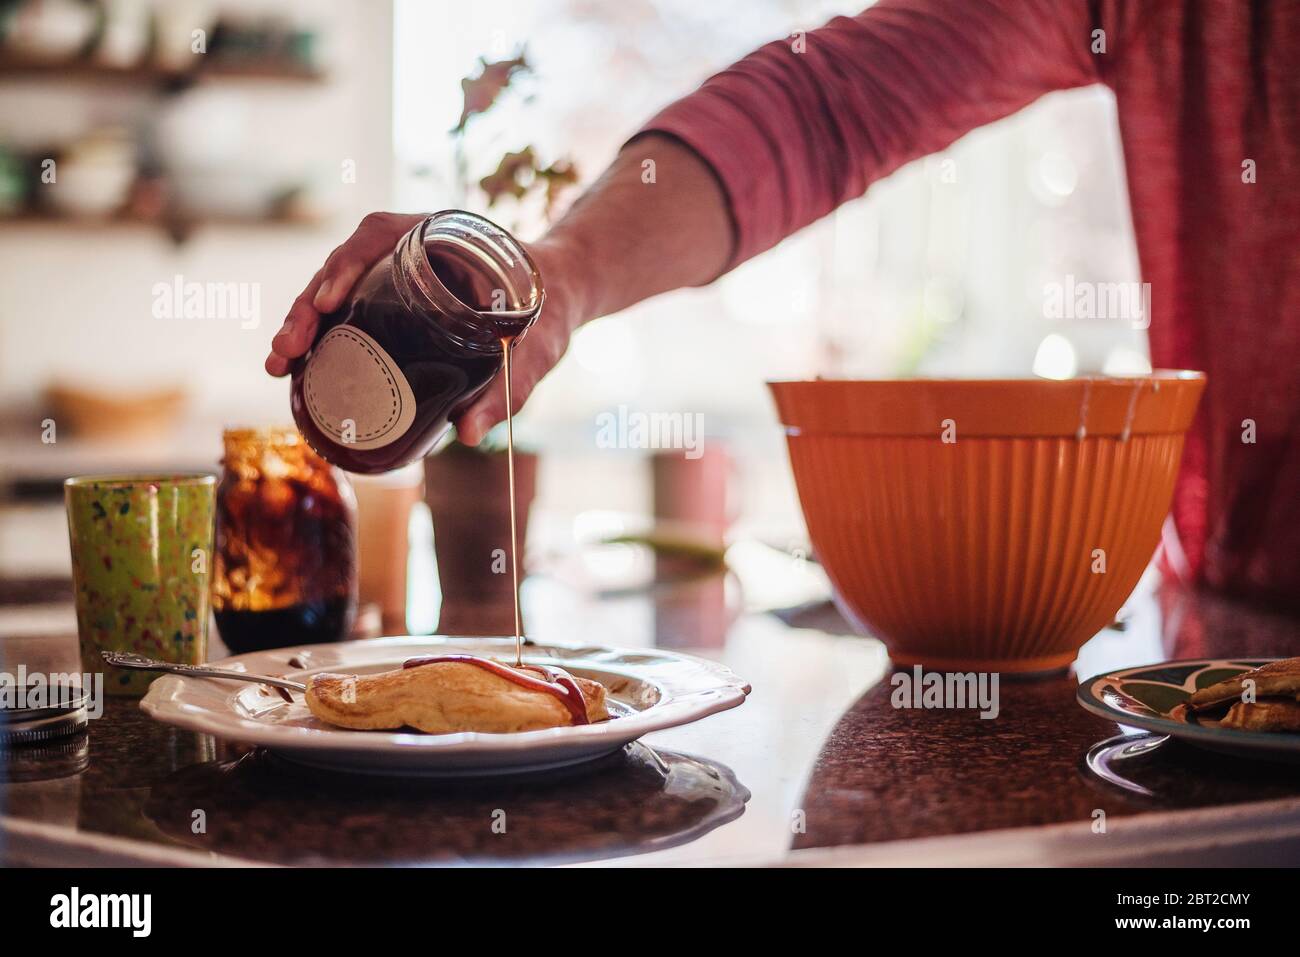 Father making pancakes for breakfast, USA Stock Photo